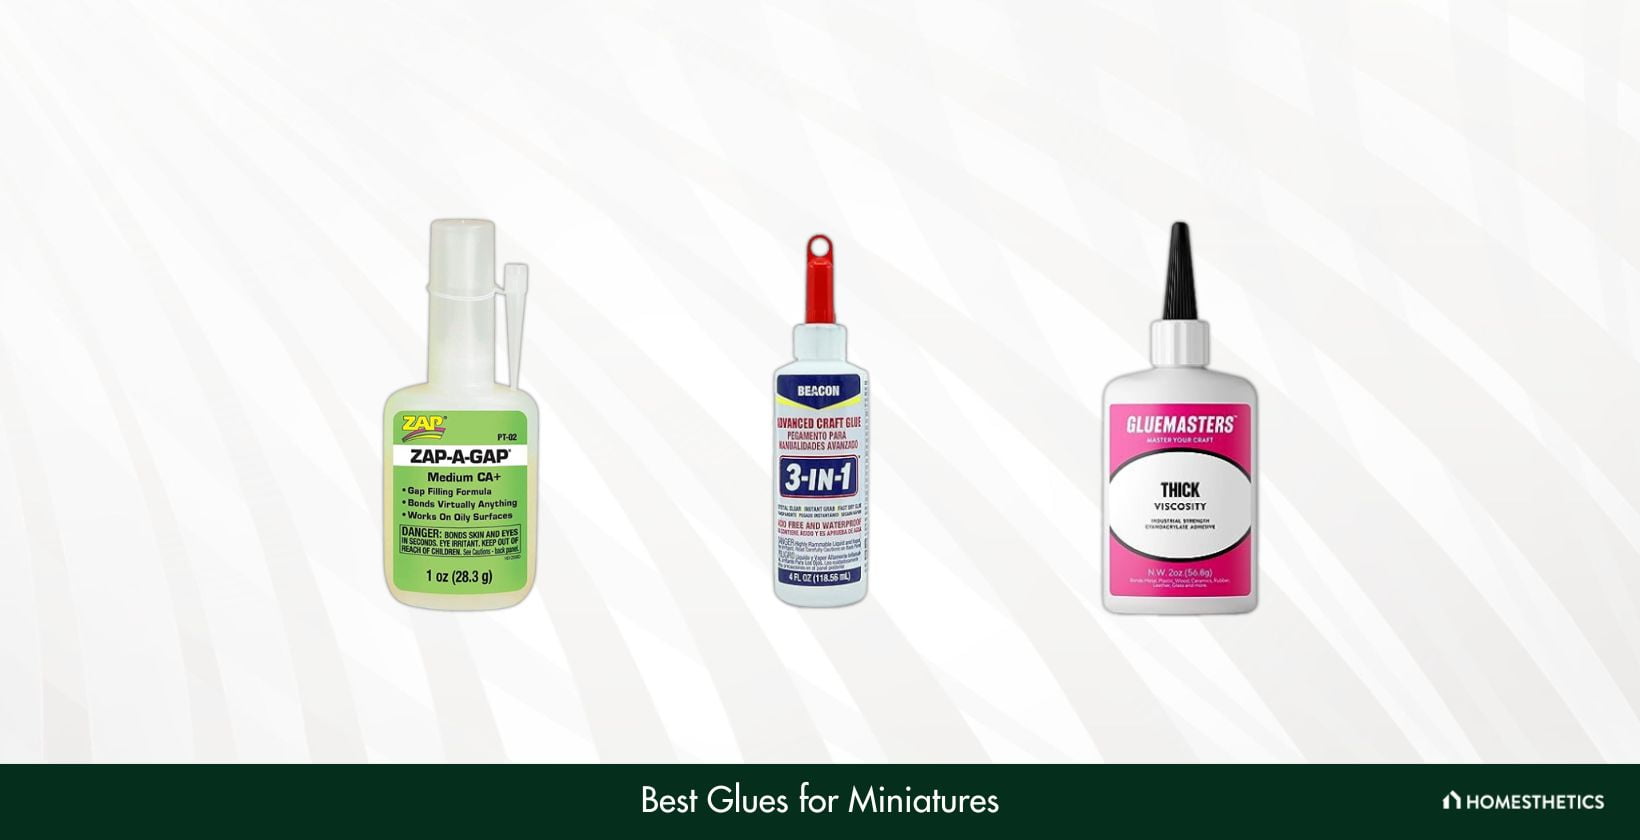 Best Glues for Miniatures